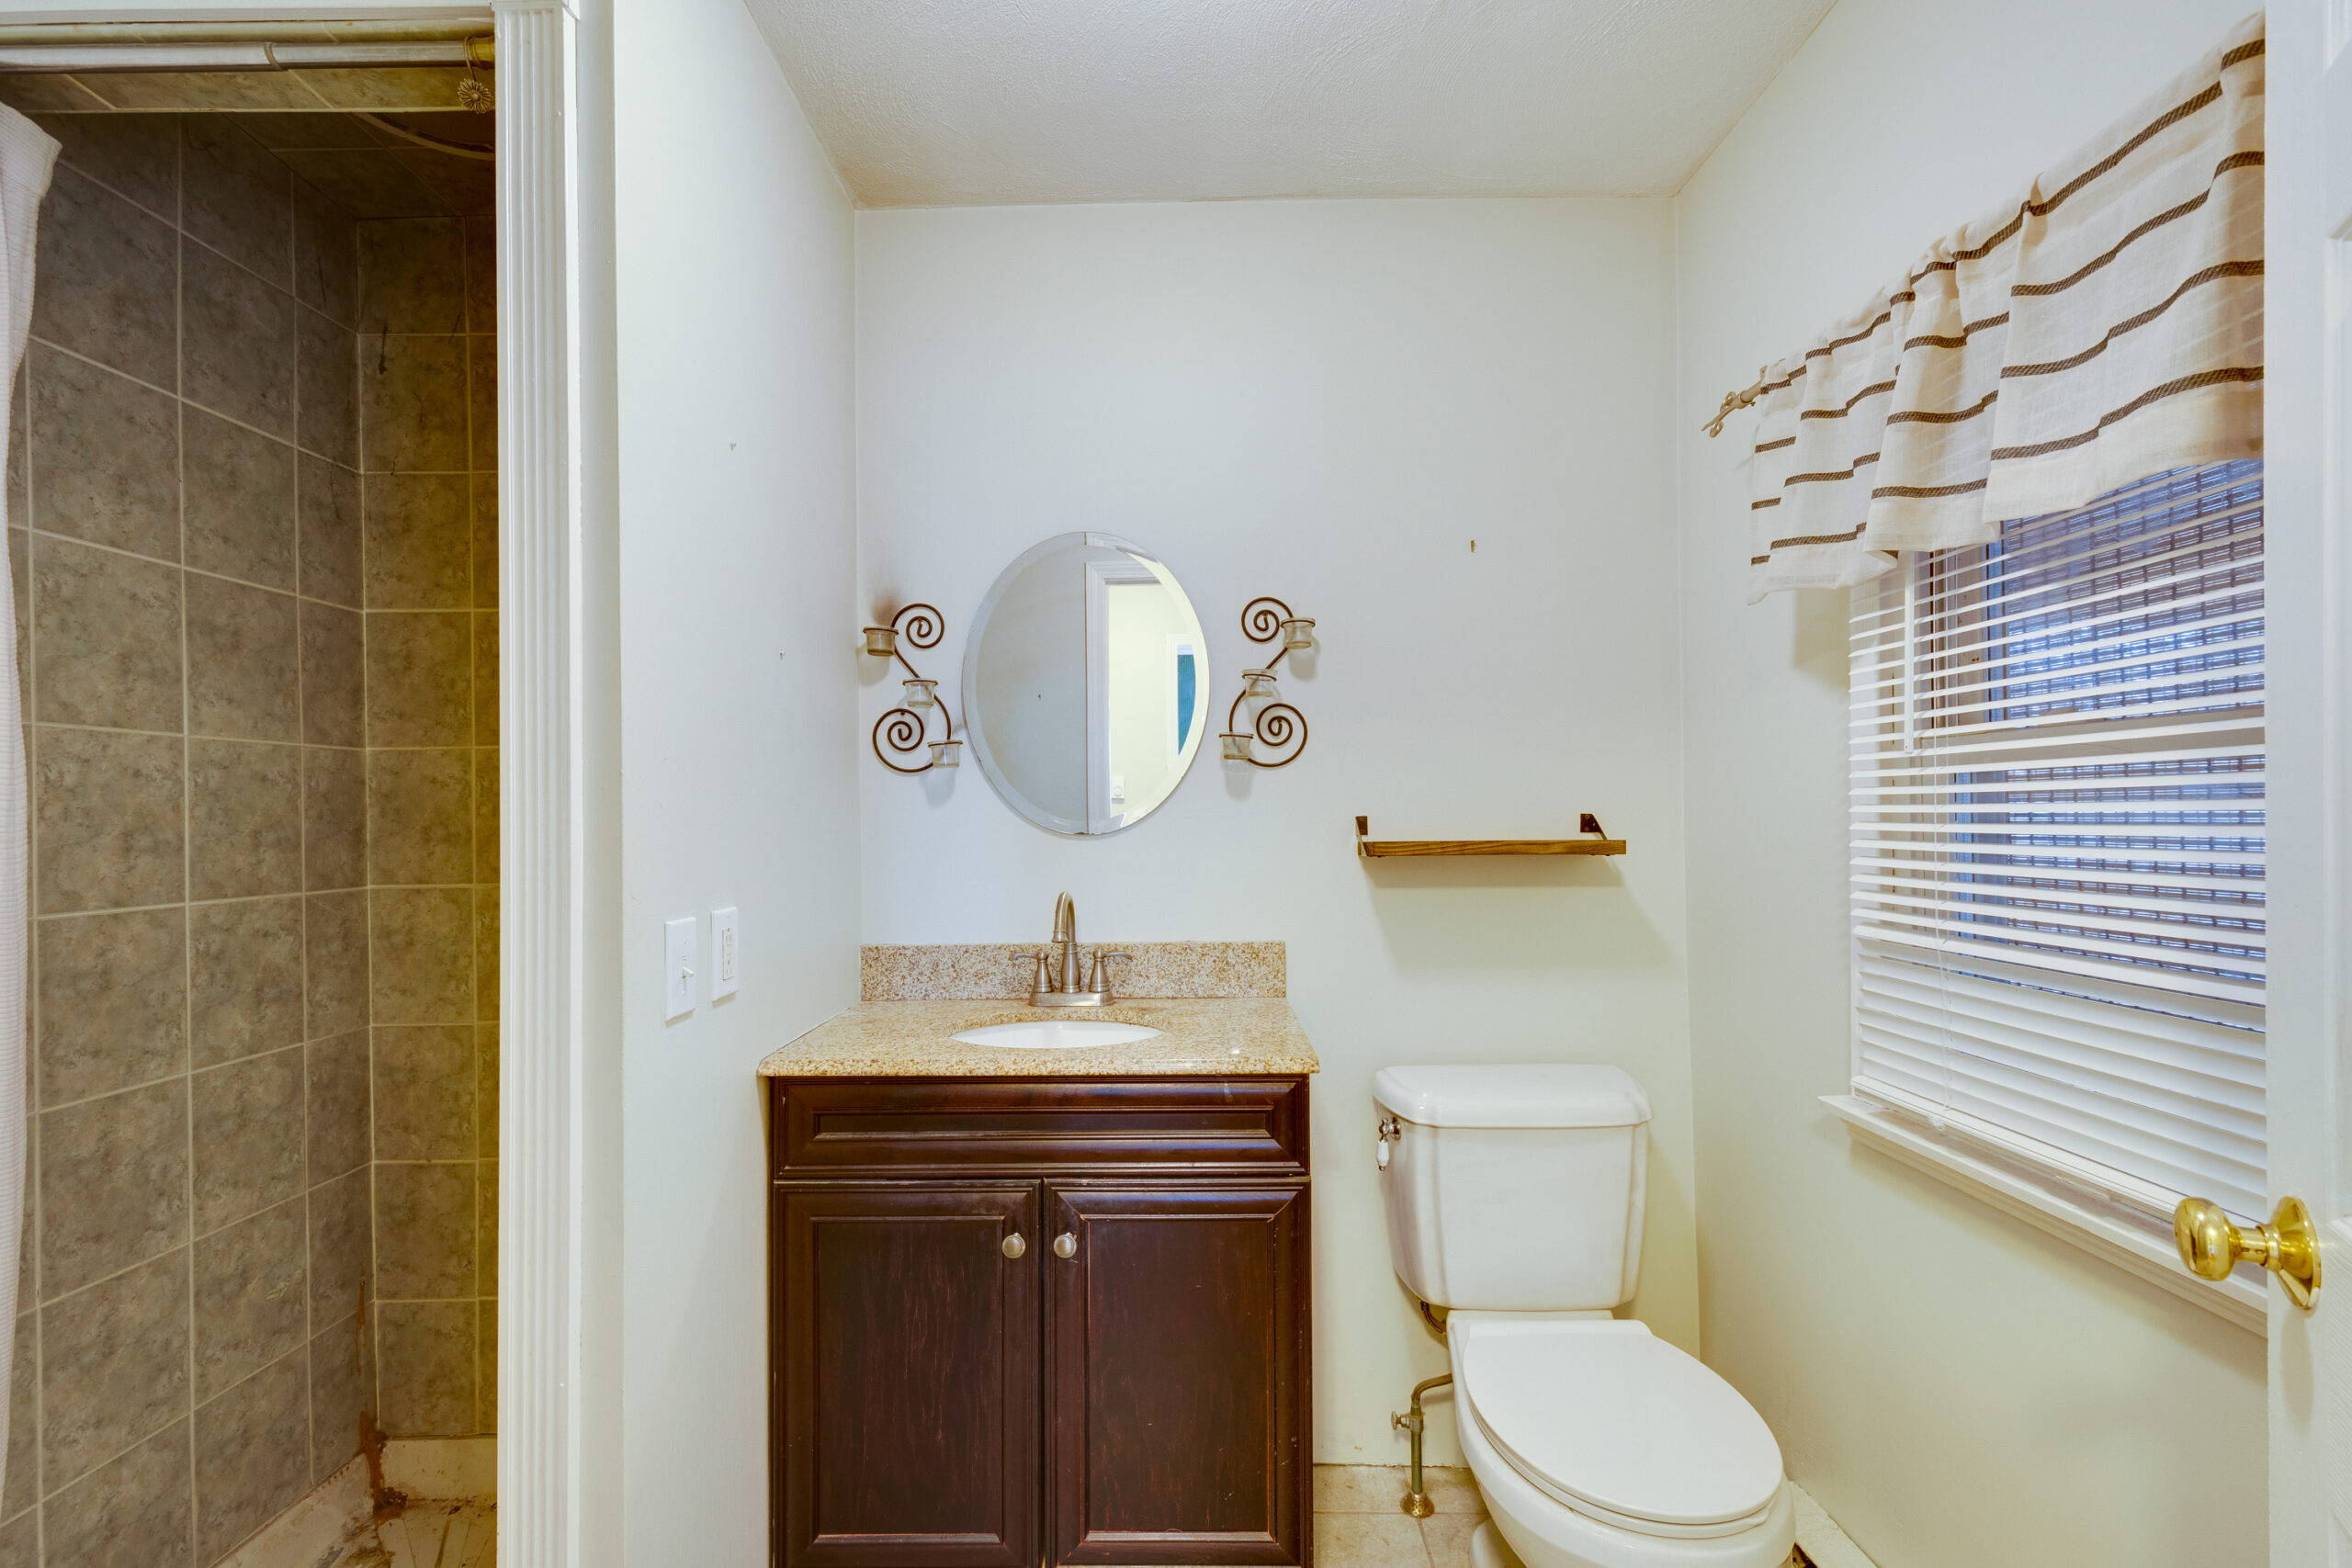 Before image of a bathroom in a vintage New England home featuring dated fixtures and a cramped layout prior to renovation.